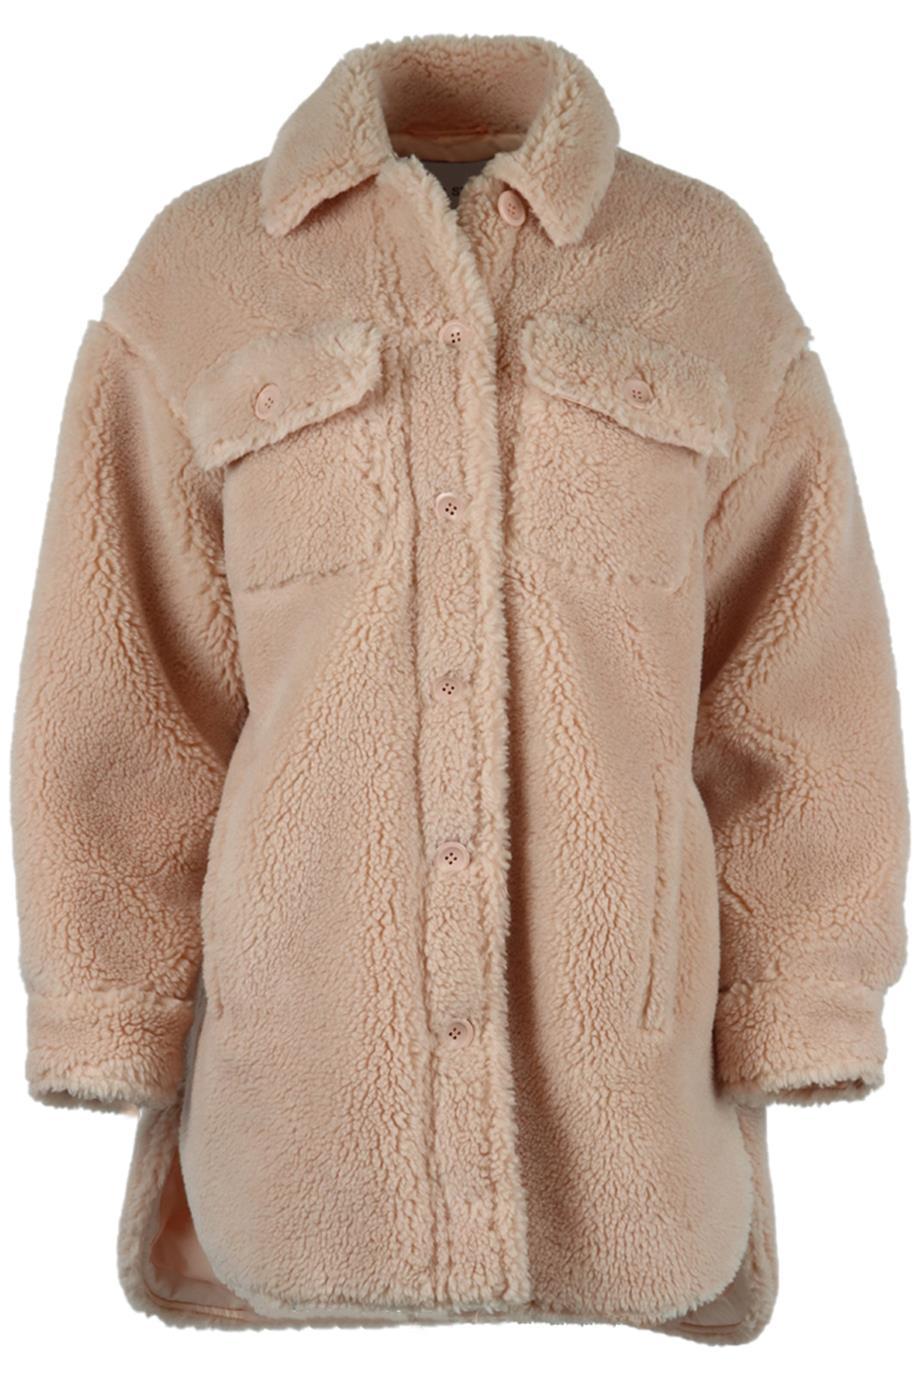 STAND STUDIOS OVERSIZED FAUX SHEARLING JACKET XSMALL